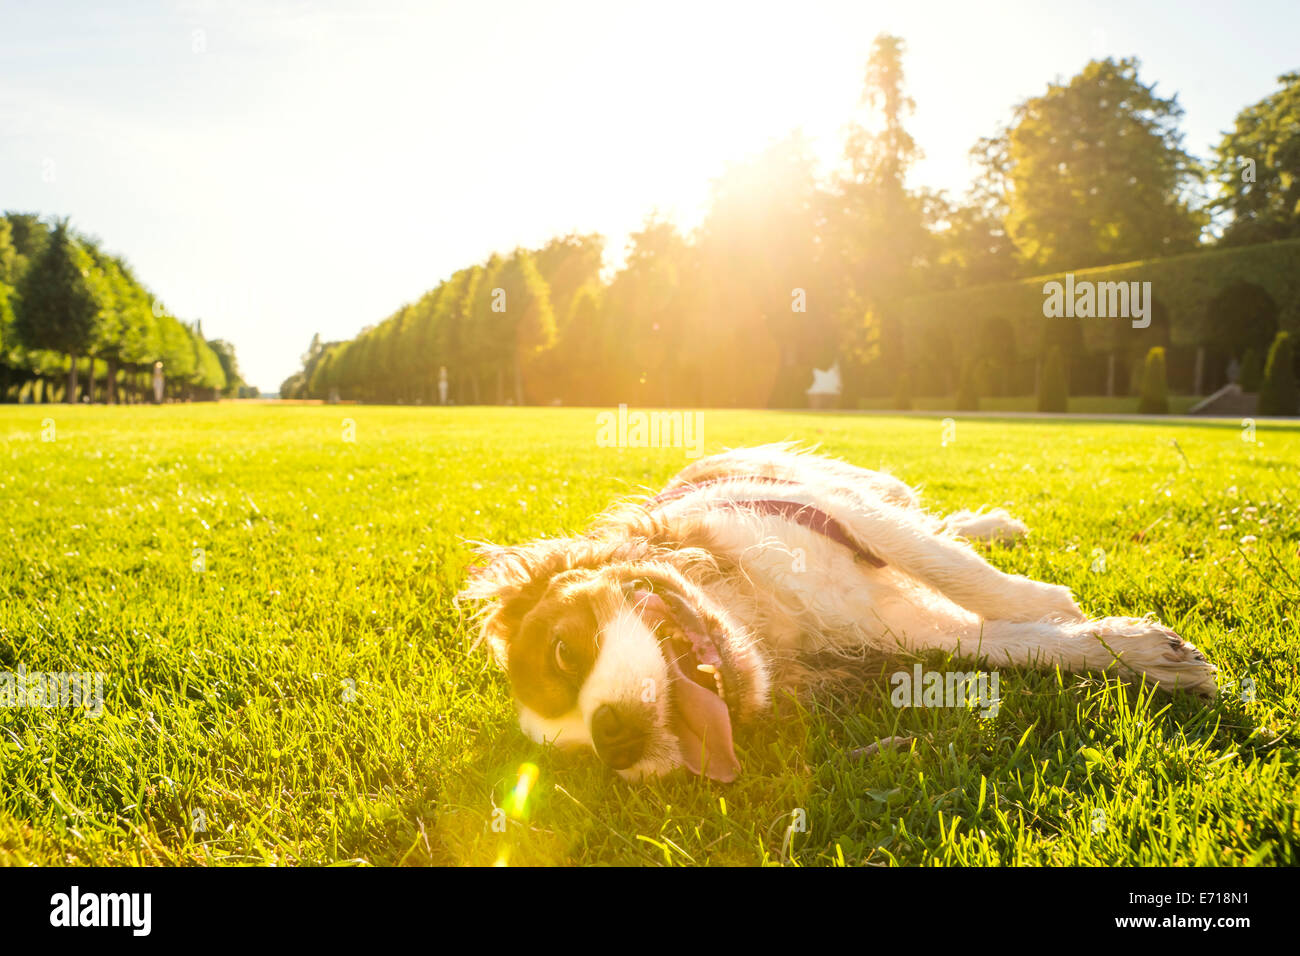 Dog, Canis lupus familiaris, lying on a meadow Stock Photo